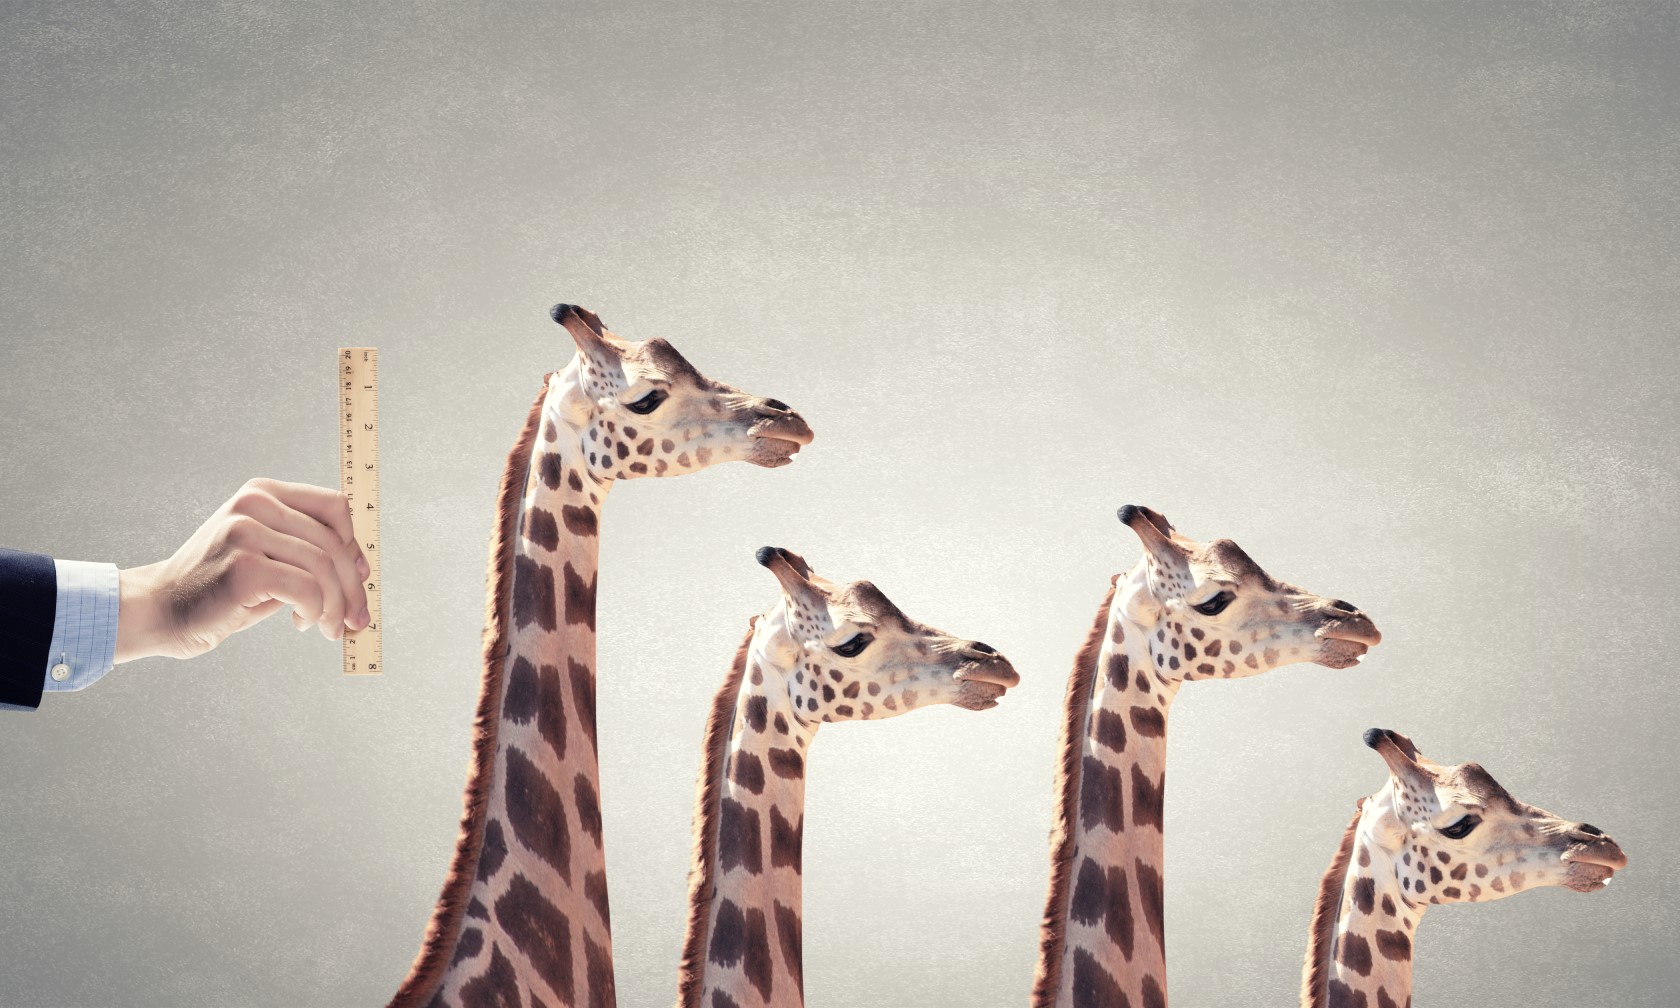 The heads of four giraffes of differing height appear in profile. A business person’s hand holds a ruler up next to them.